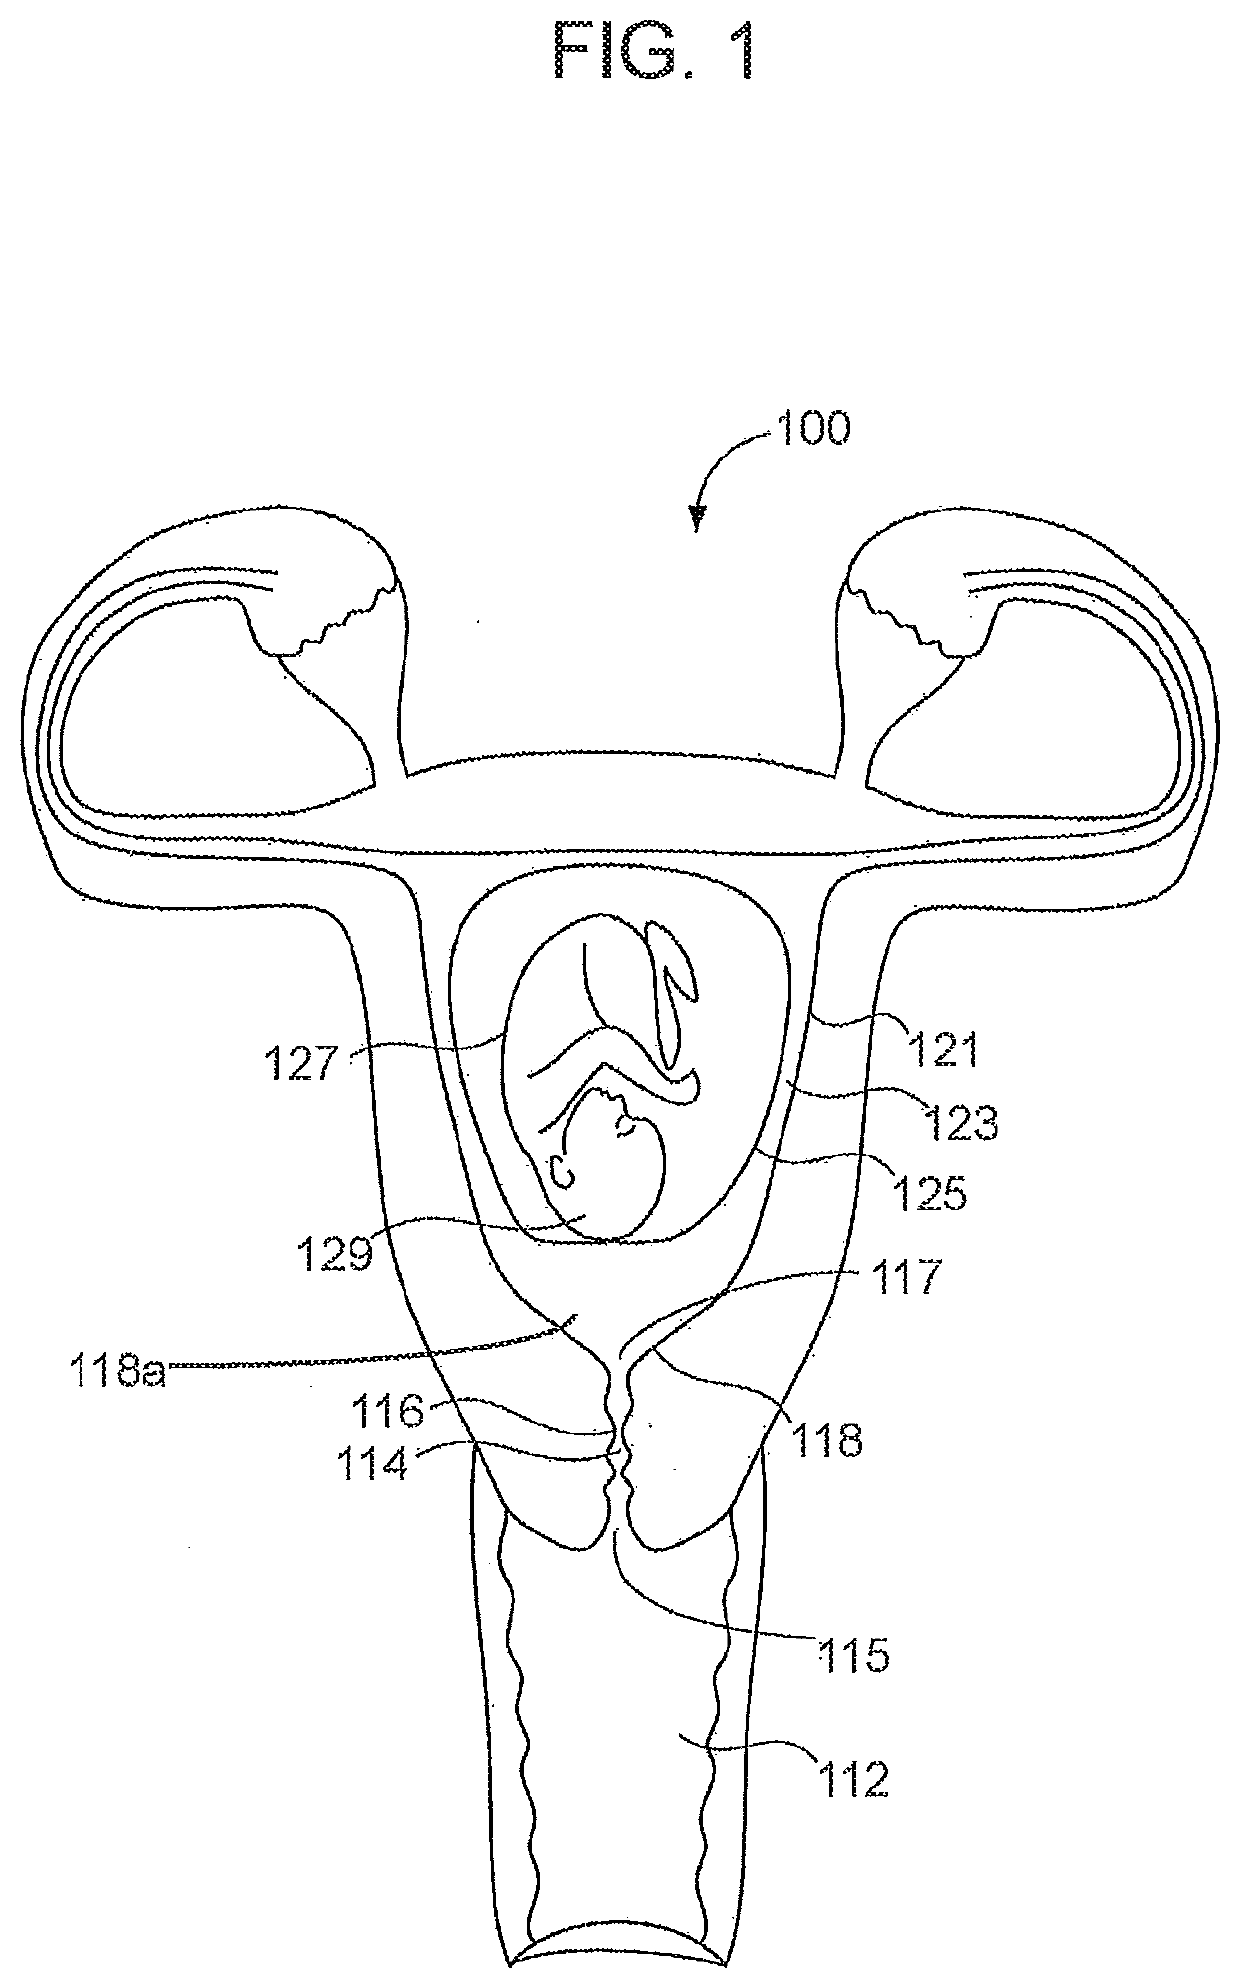 Integrated pressure and fetal heart rate monitoring cervical ripening catheter